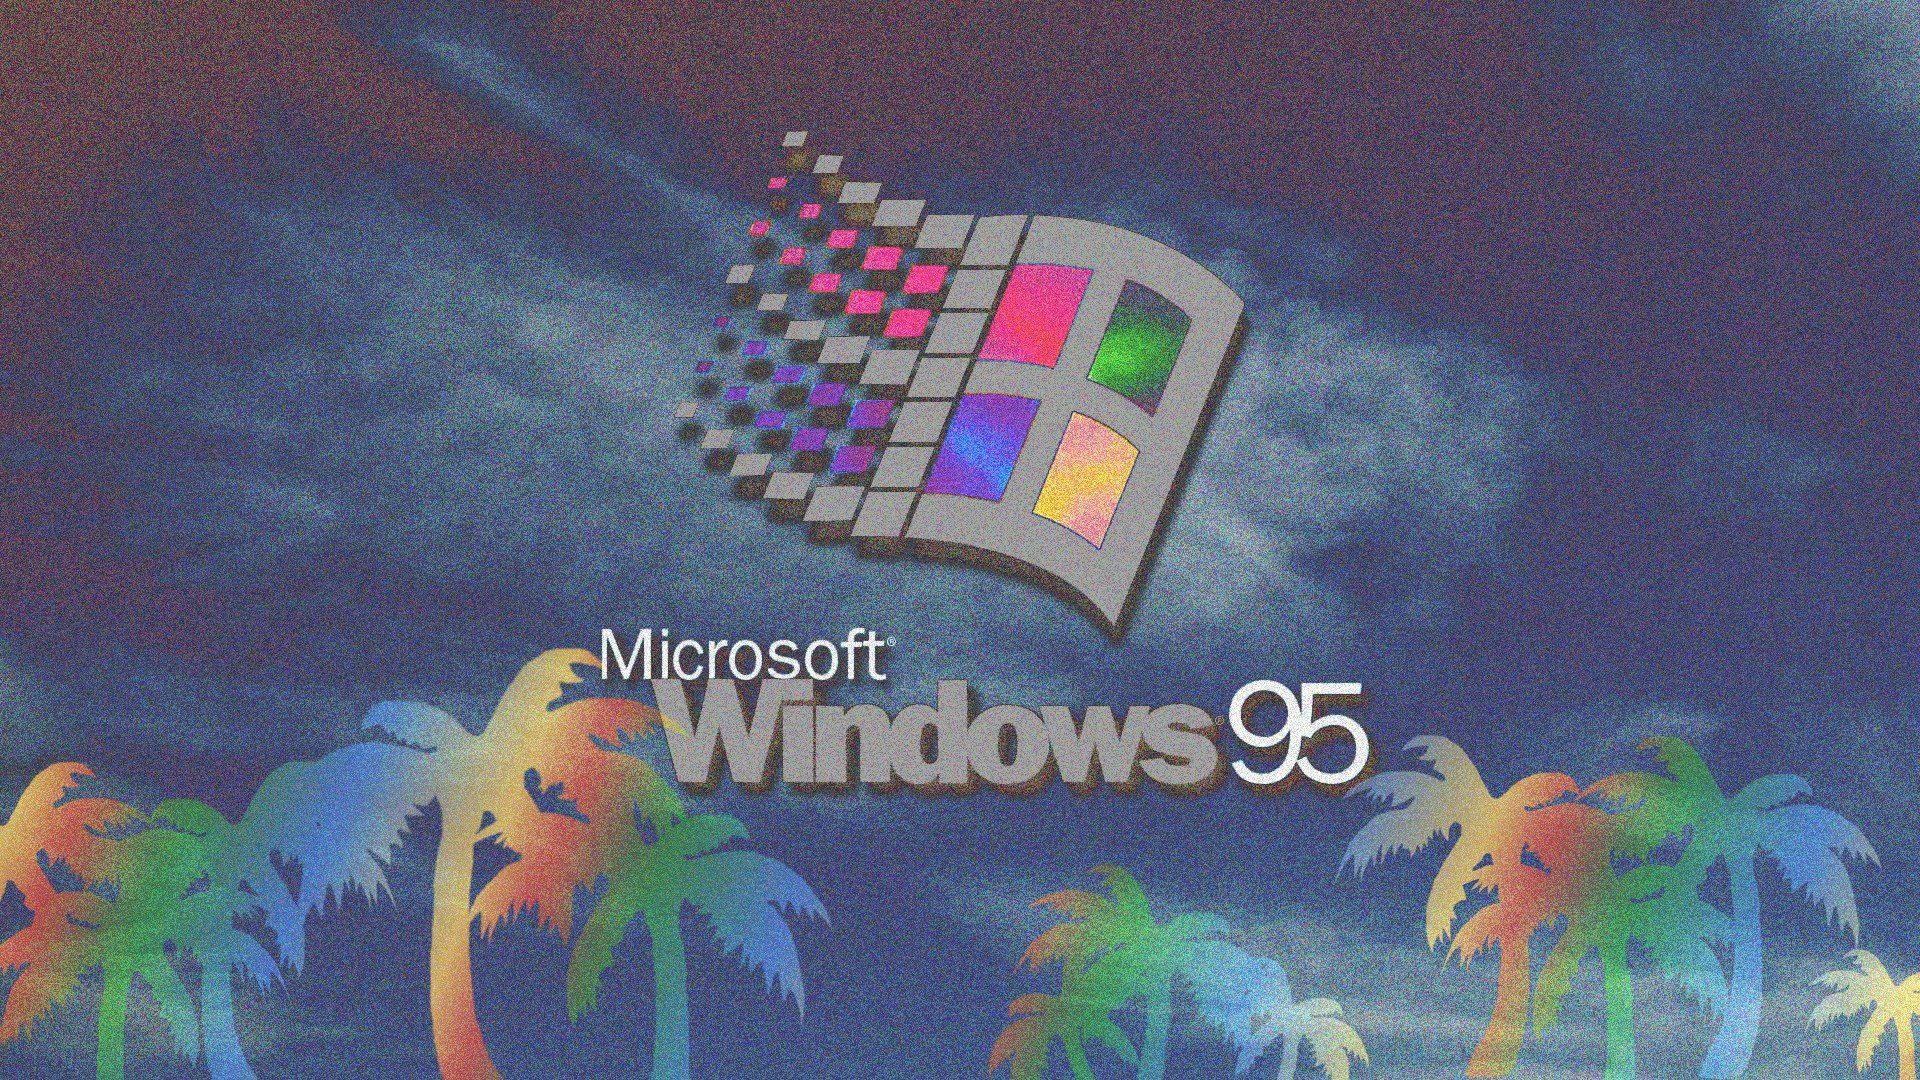 Microsoft Windows, Vaporwave, Palm trees, Windows 95 Wallpapers HD / Desktop and Mobile Backgrounds